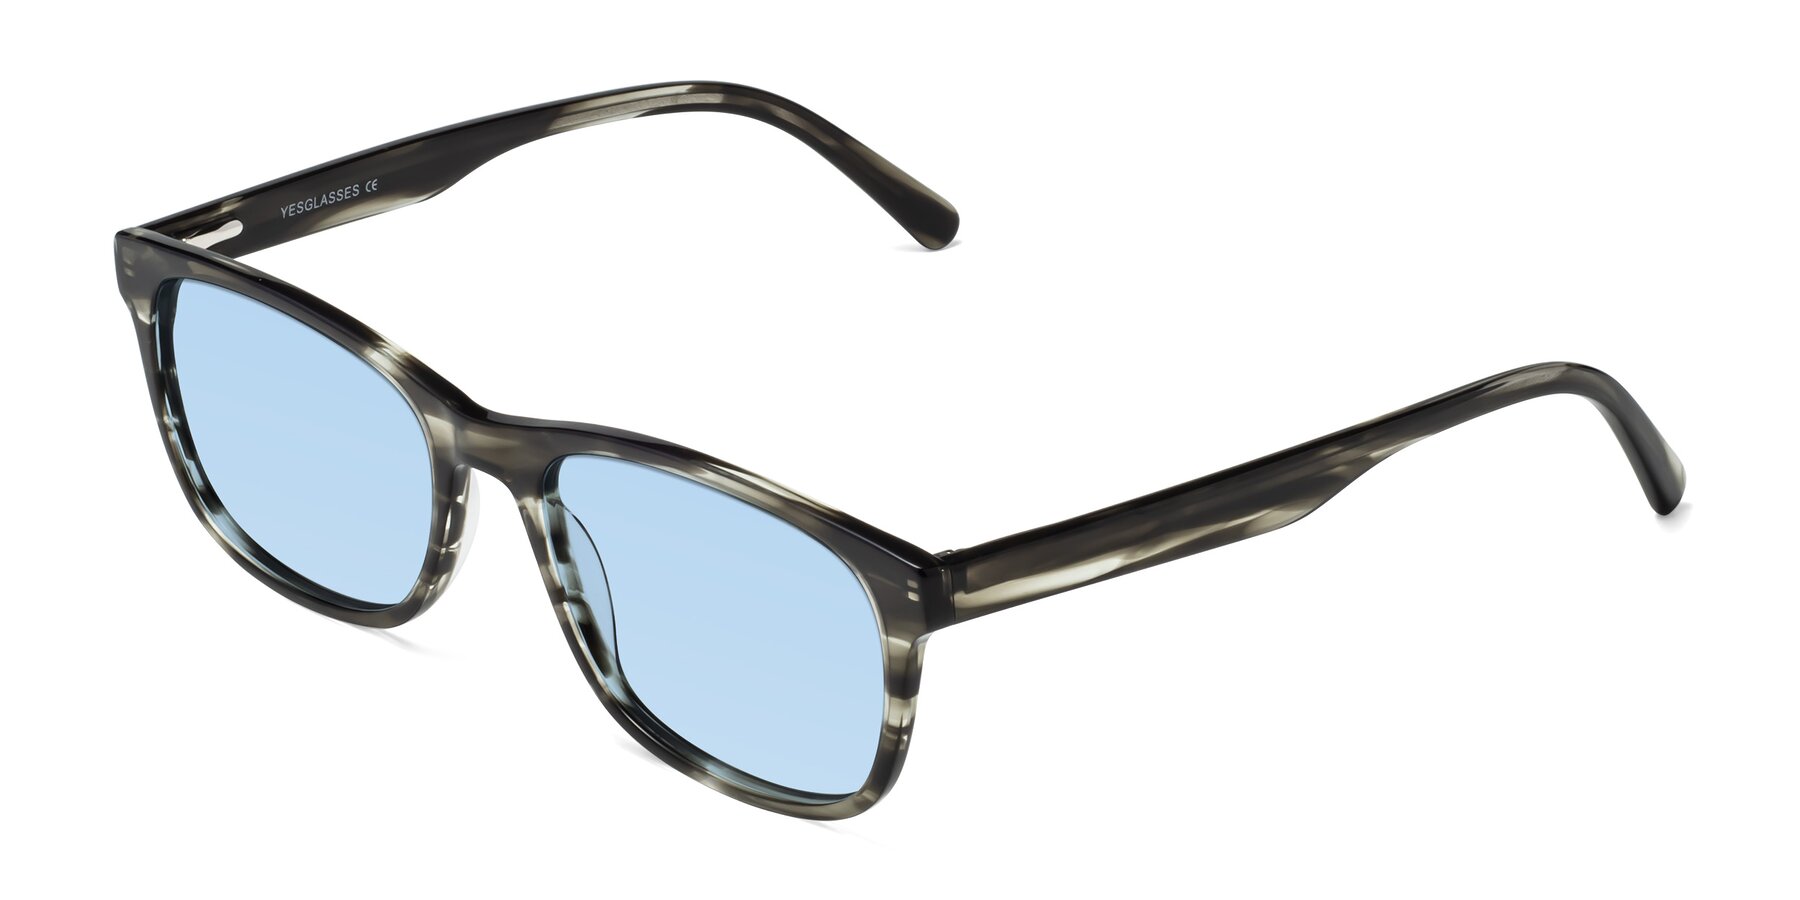 Angle of Navarro in Gray-Tortoise with Light Blue Tinted Lenses